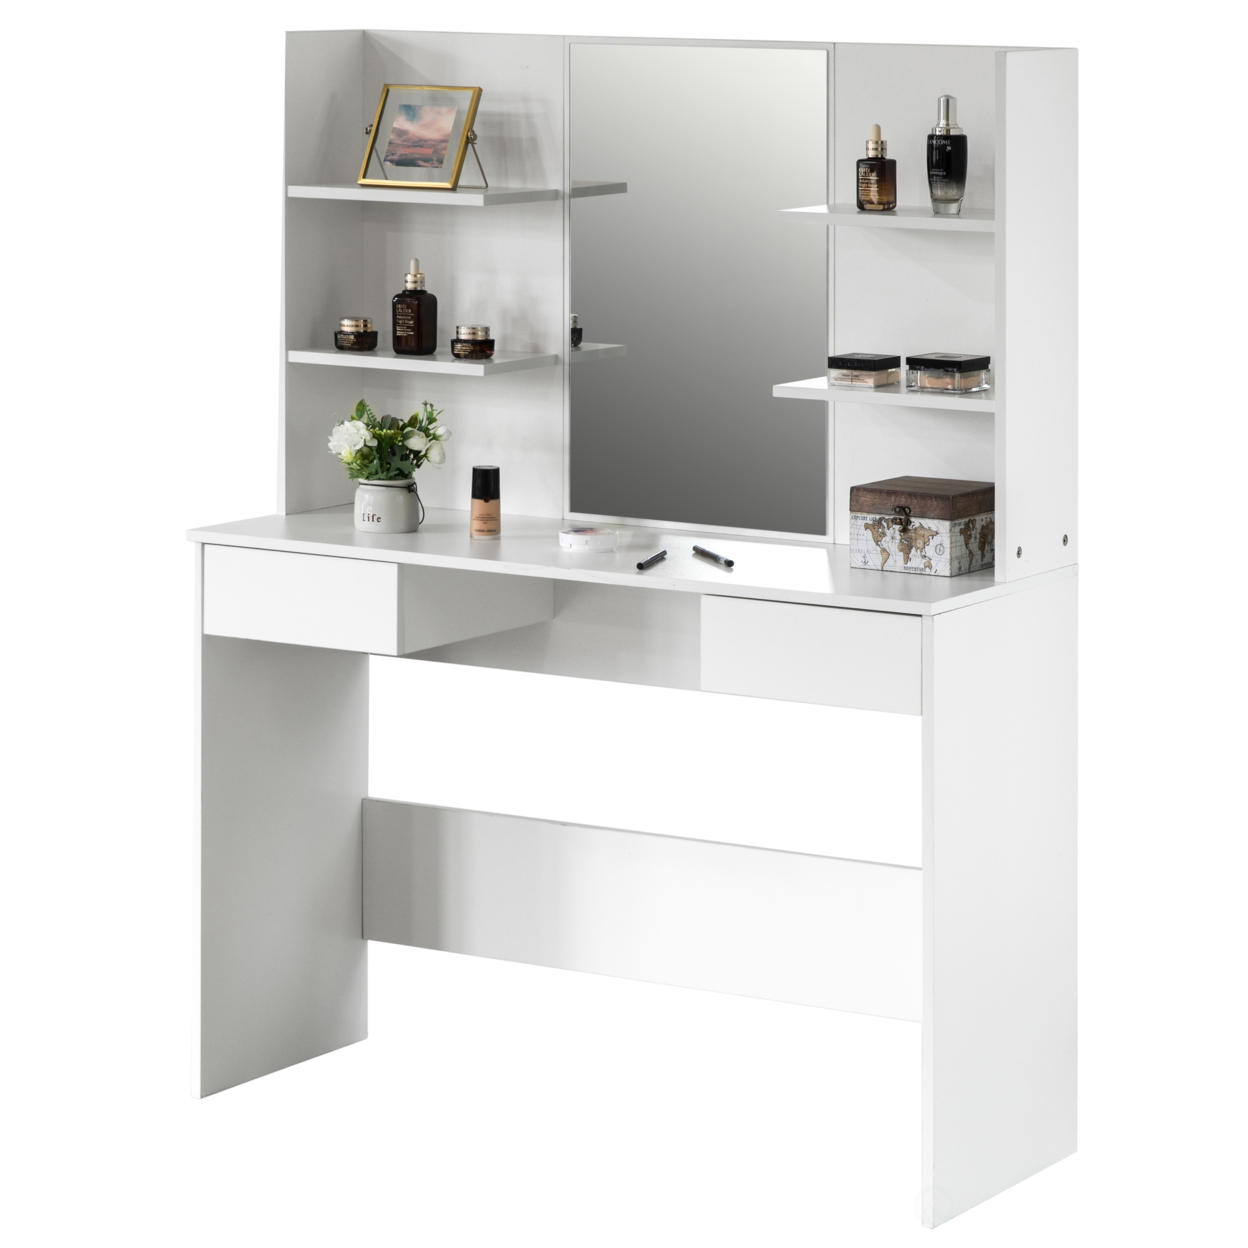 Modern Wooden Dressing Table With Drawer, Mirror And Shelves For The Dining Room, Entryway And Bedroom - White